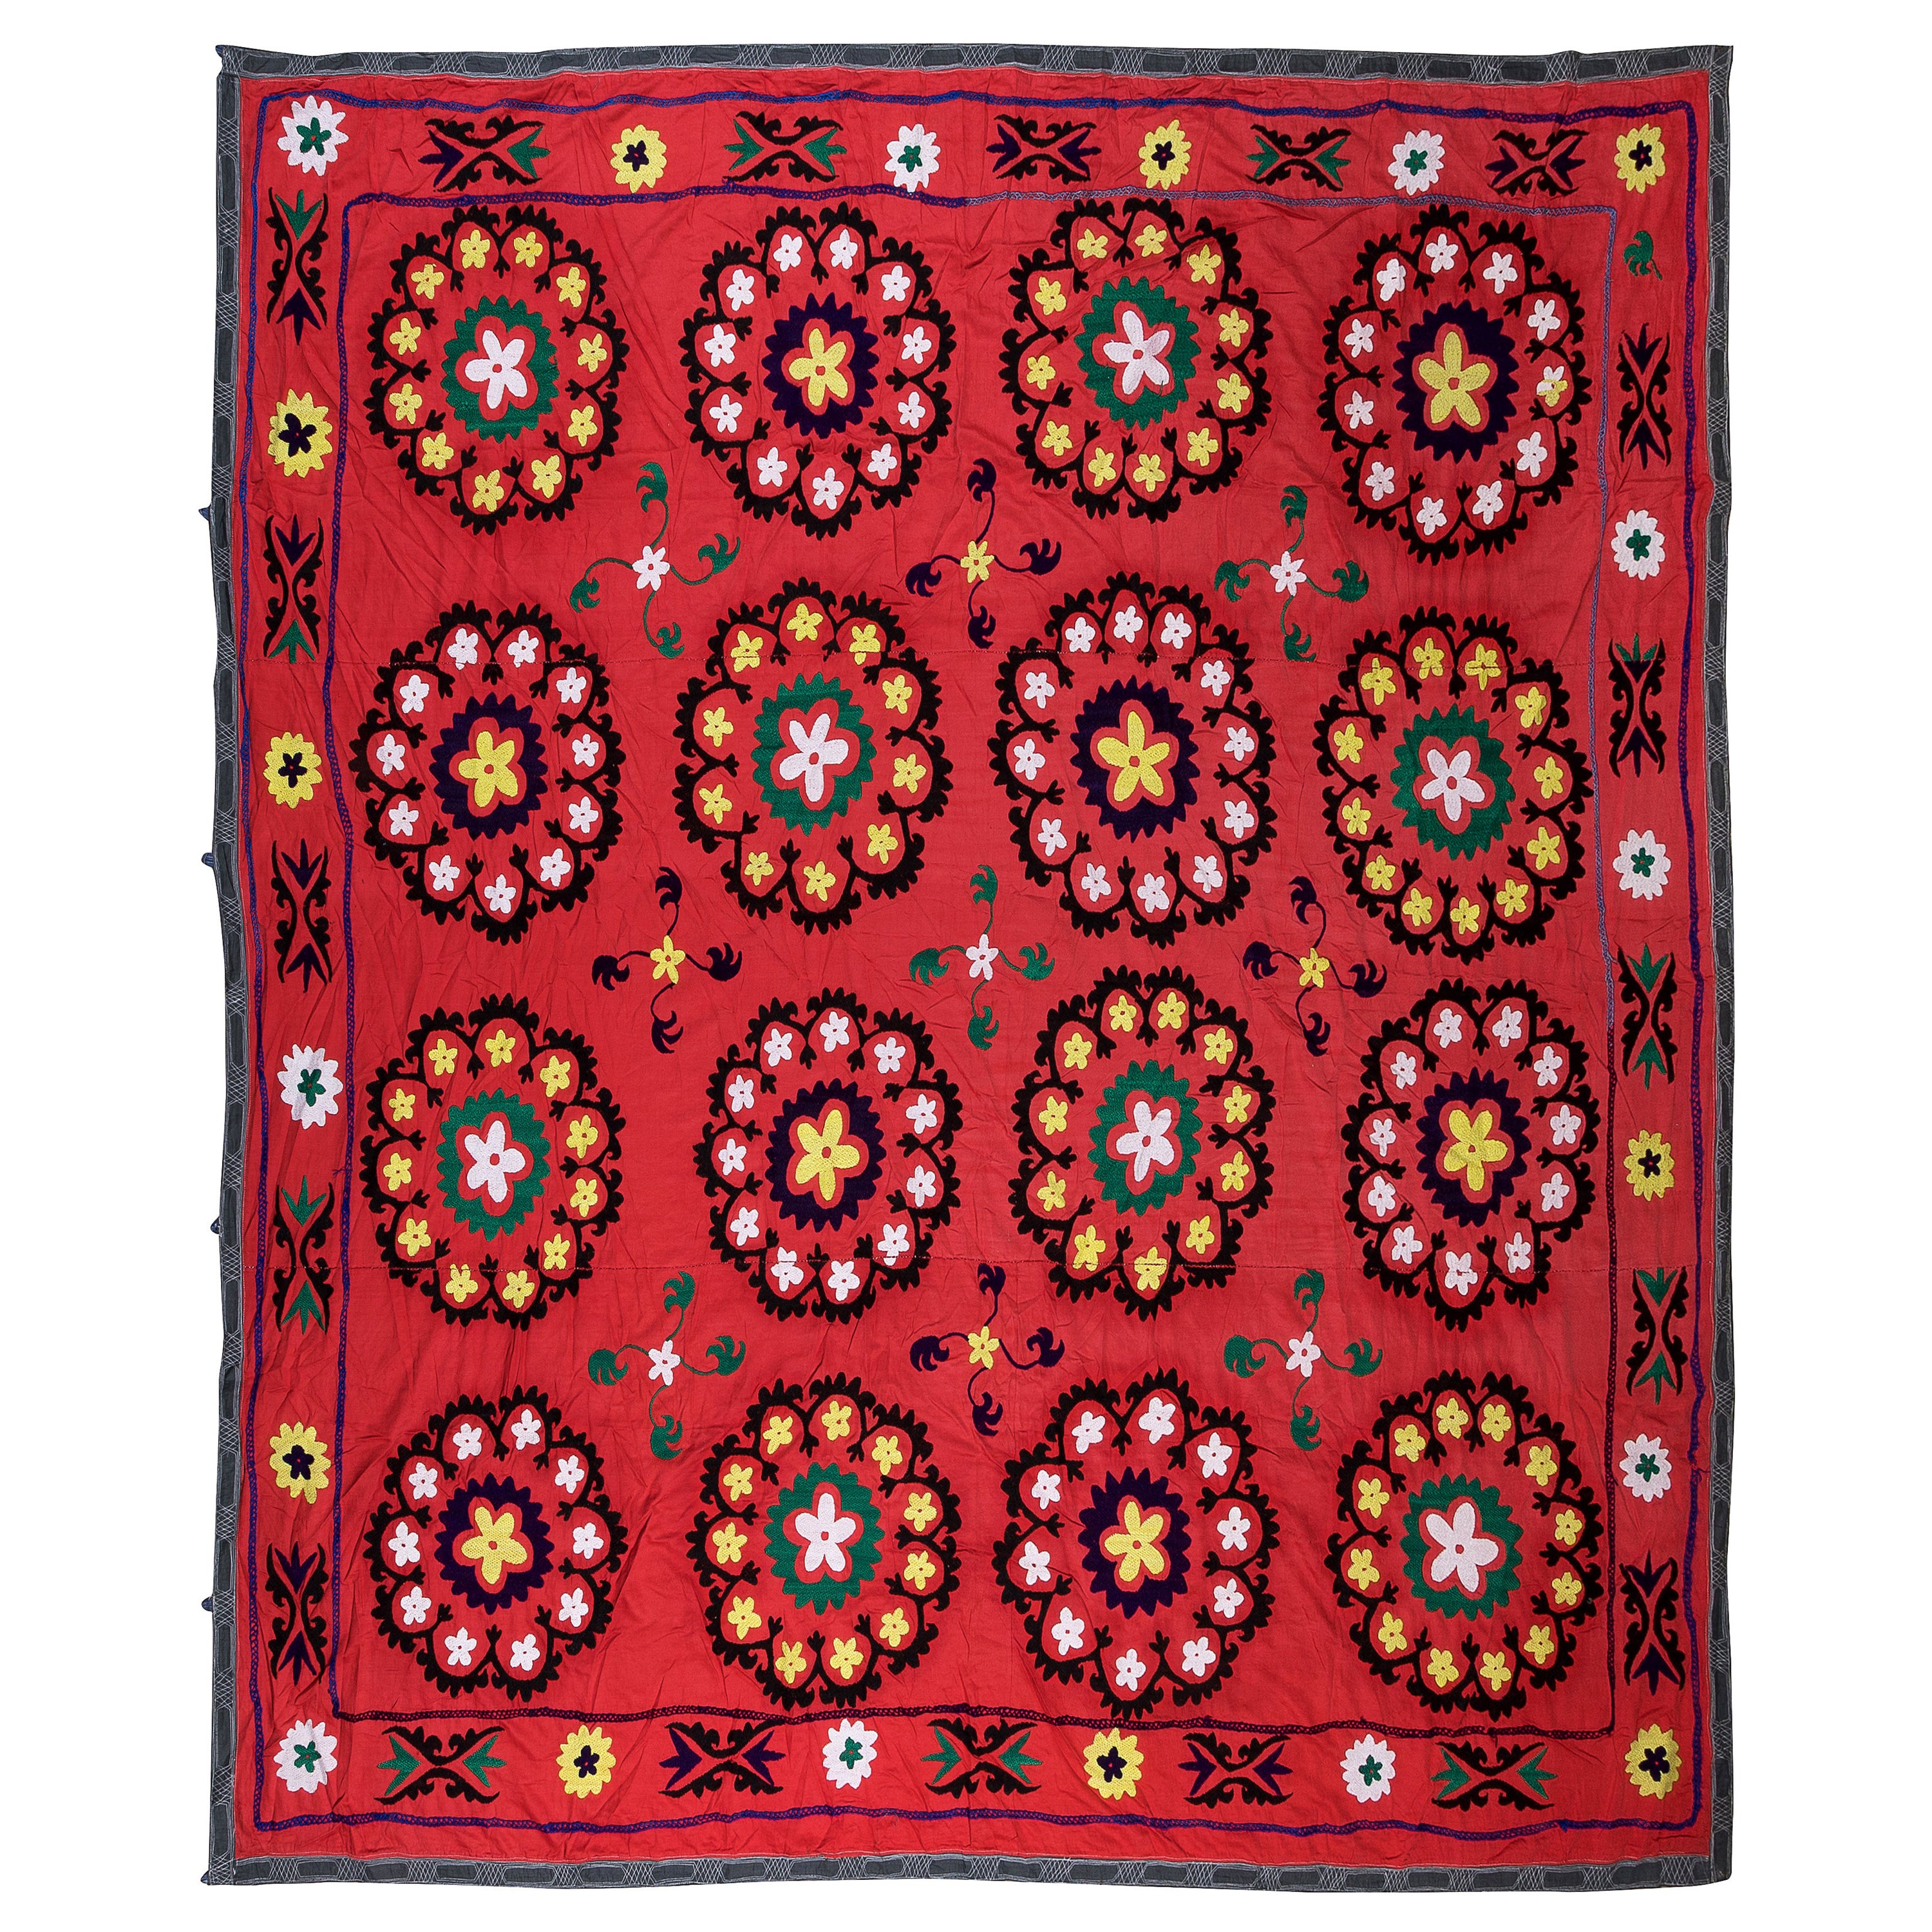 7.9x7.9 Ft Vintage Silk Embroidery Bed Cover, Uzbek Tablecloth, Red Wall Hanging For Sale